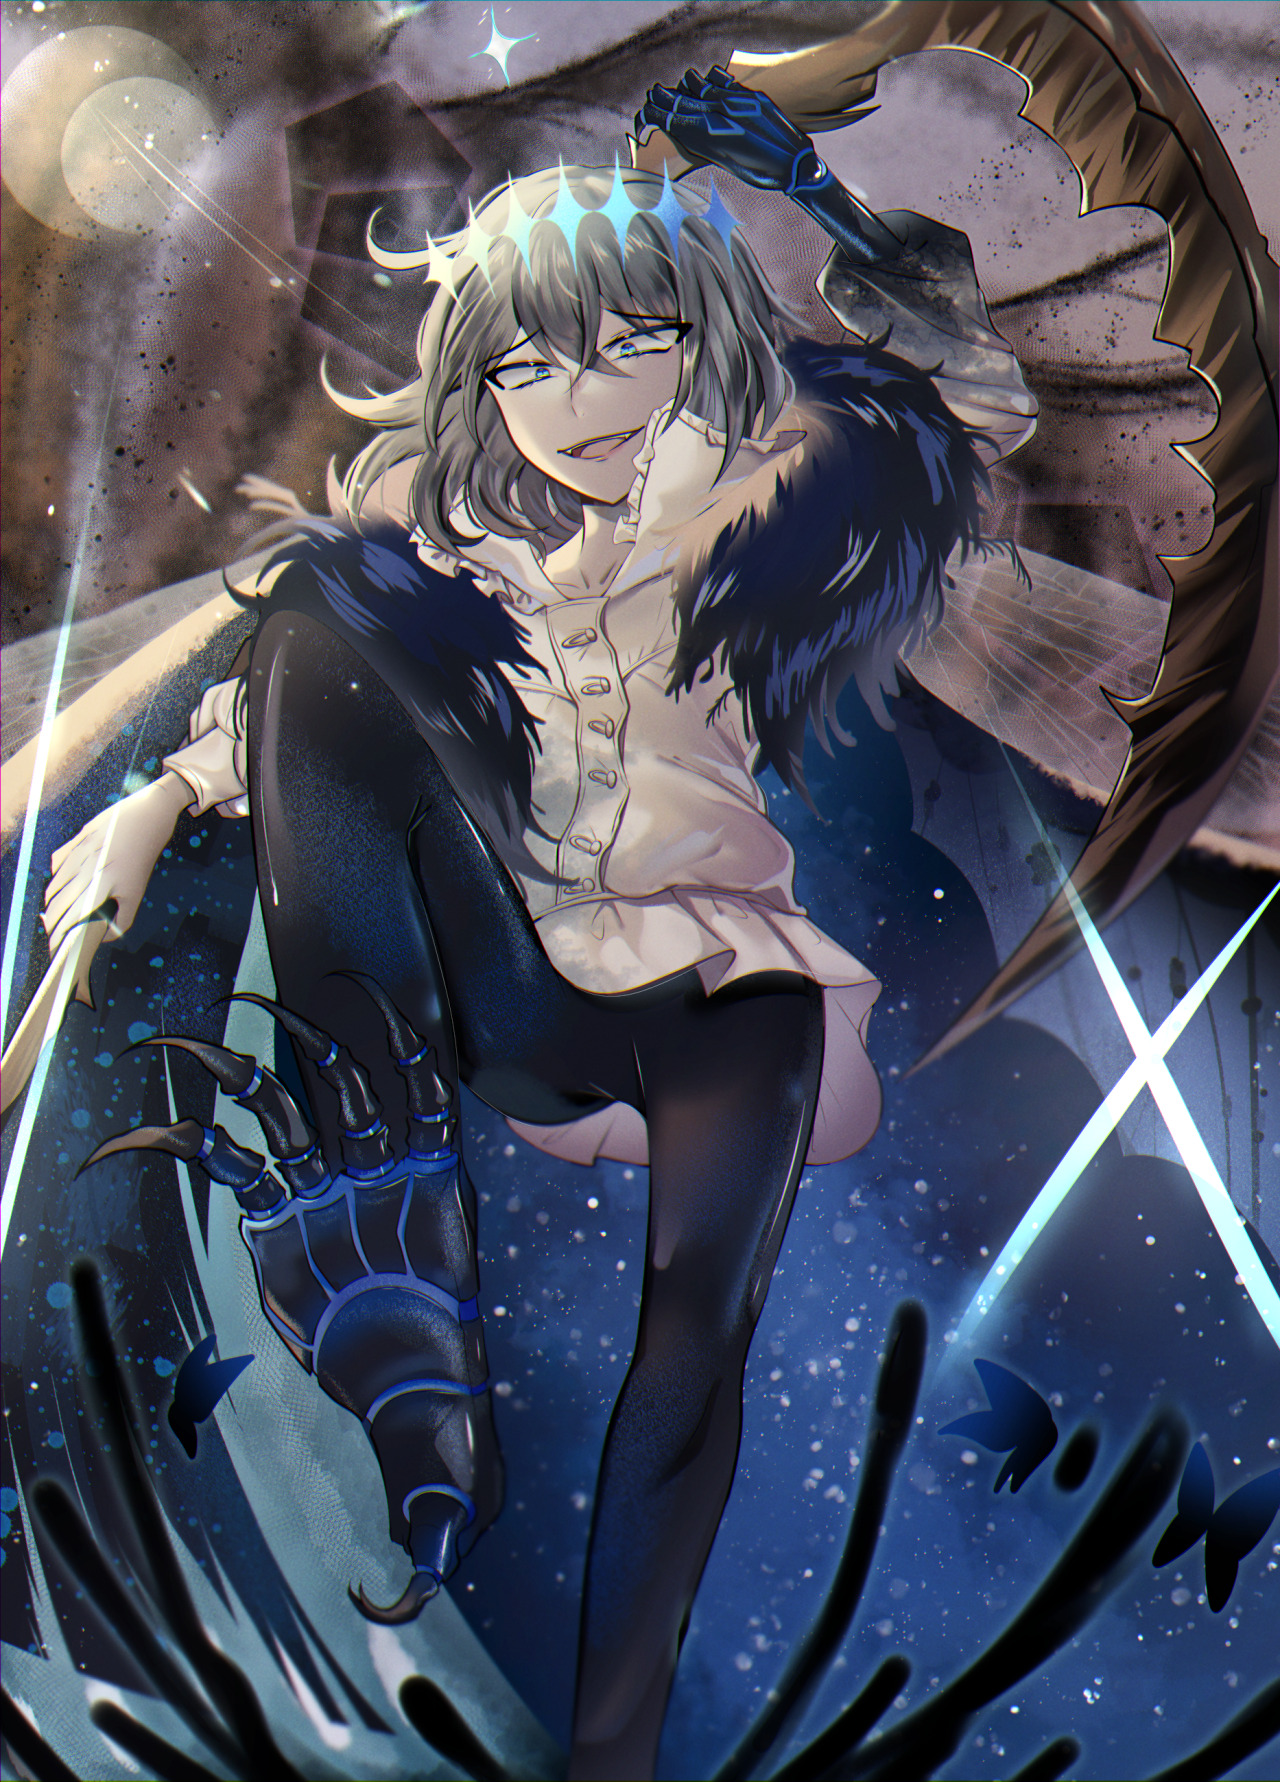 Guess we'll see him 'Oberon' the other side : r/grandorder